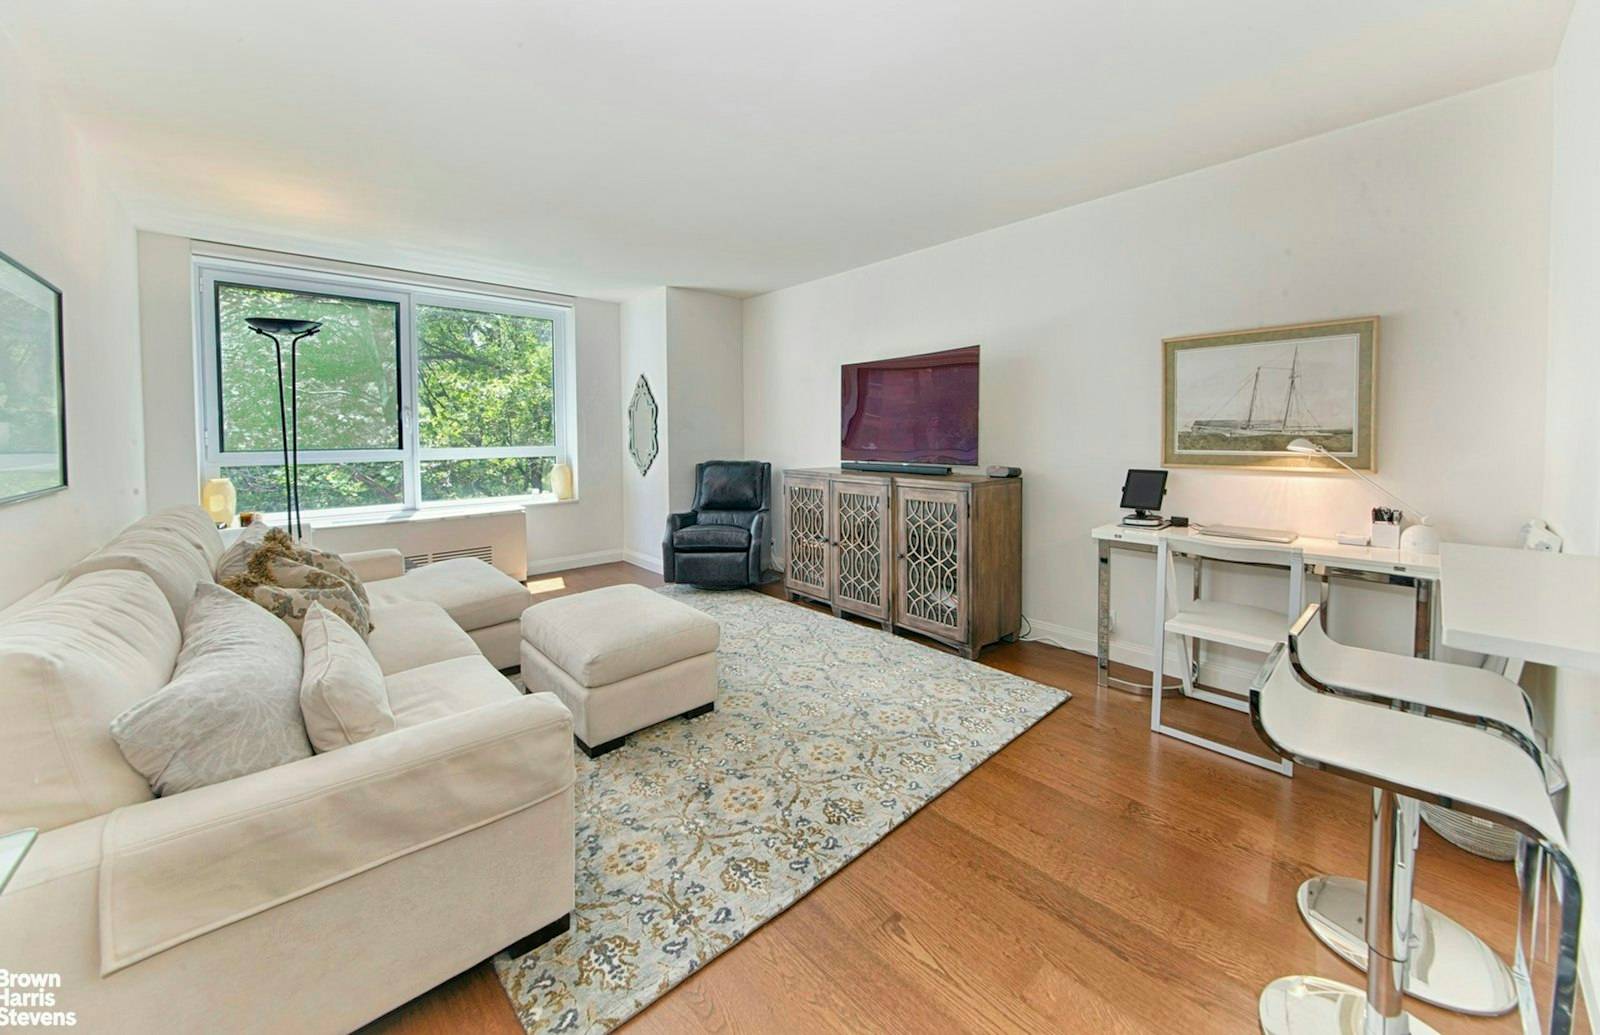 In a charmed Upper East Side location, this stunning one bedroom home is perched in the treetops and offers quiet south views about three to four stories over Carnegie Park's ...